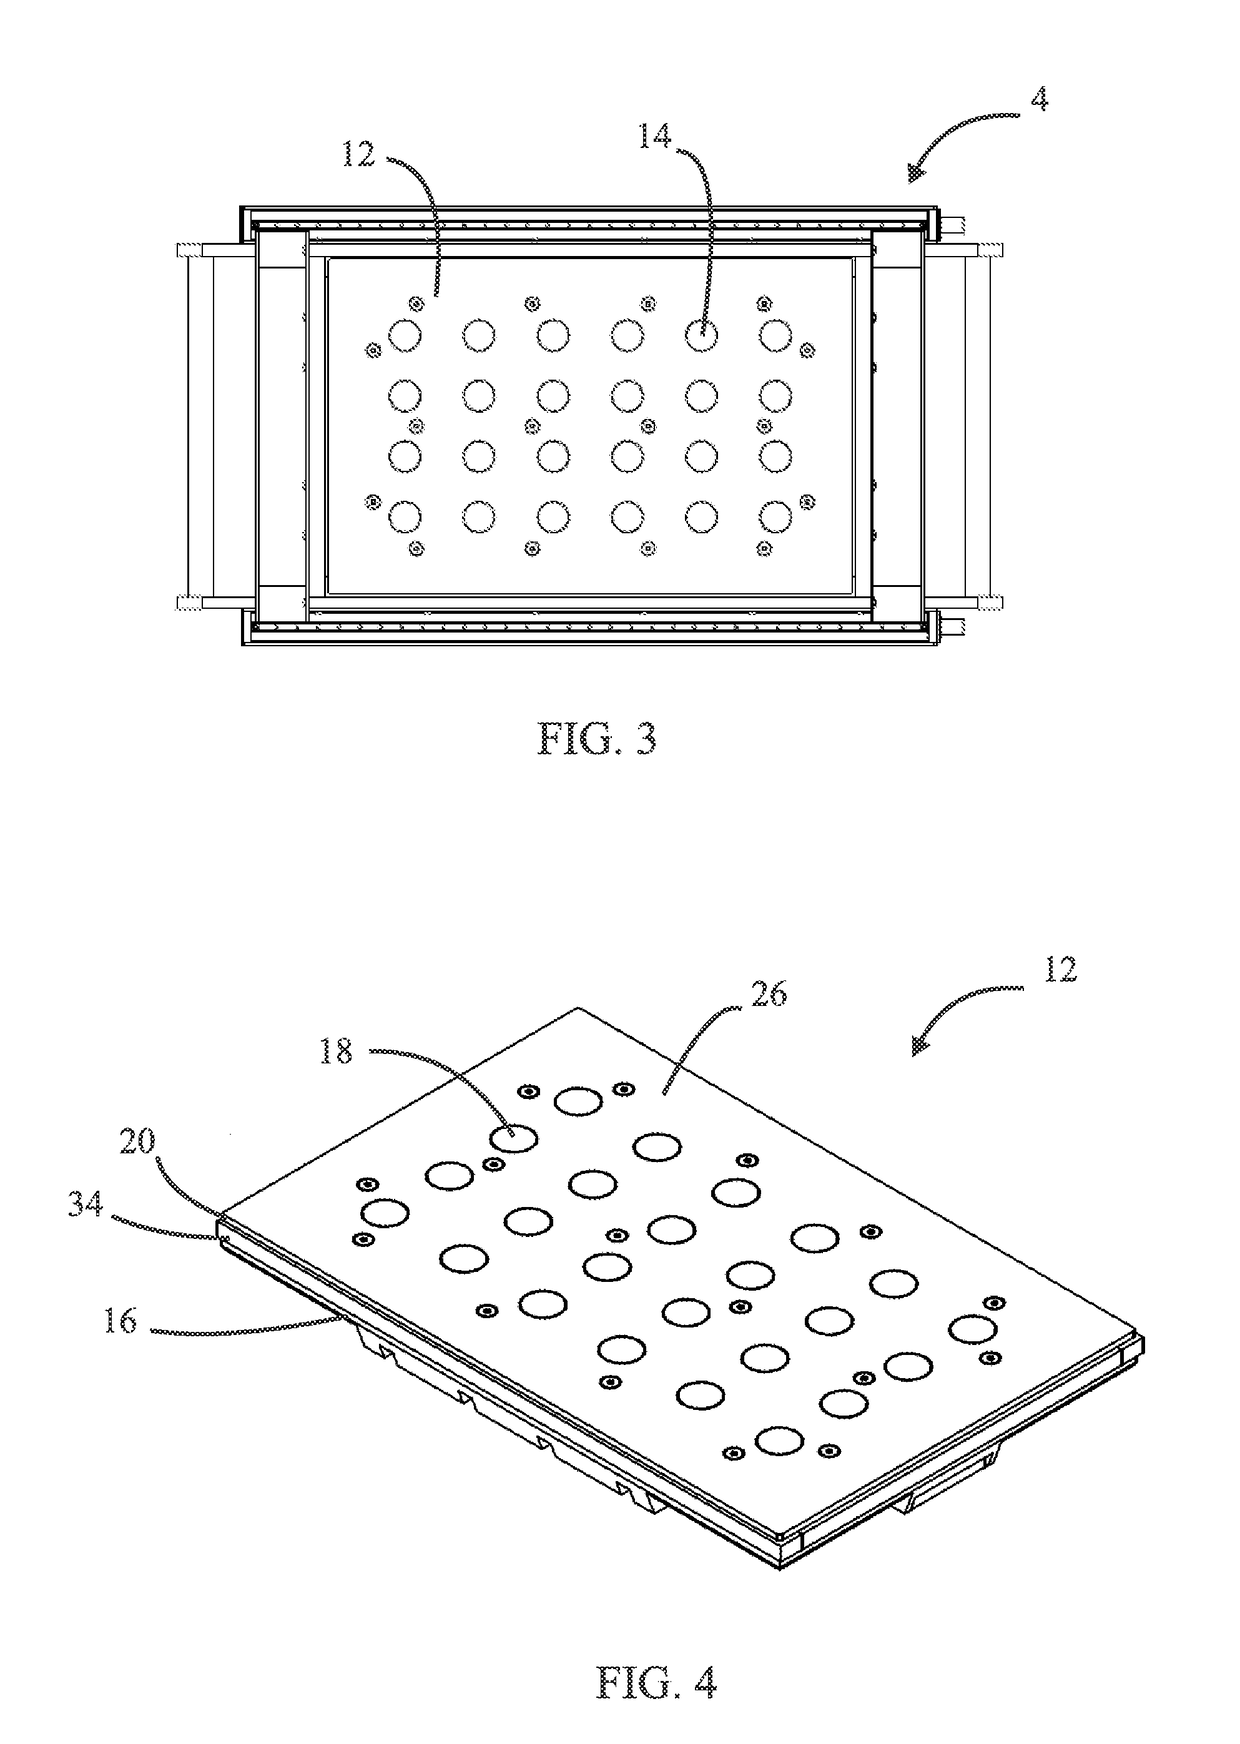 Methods and Apparatuses for Curing Three-Dimensional Printed Articles